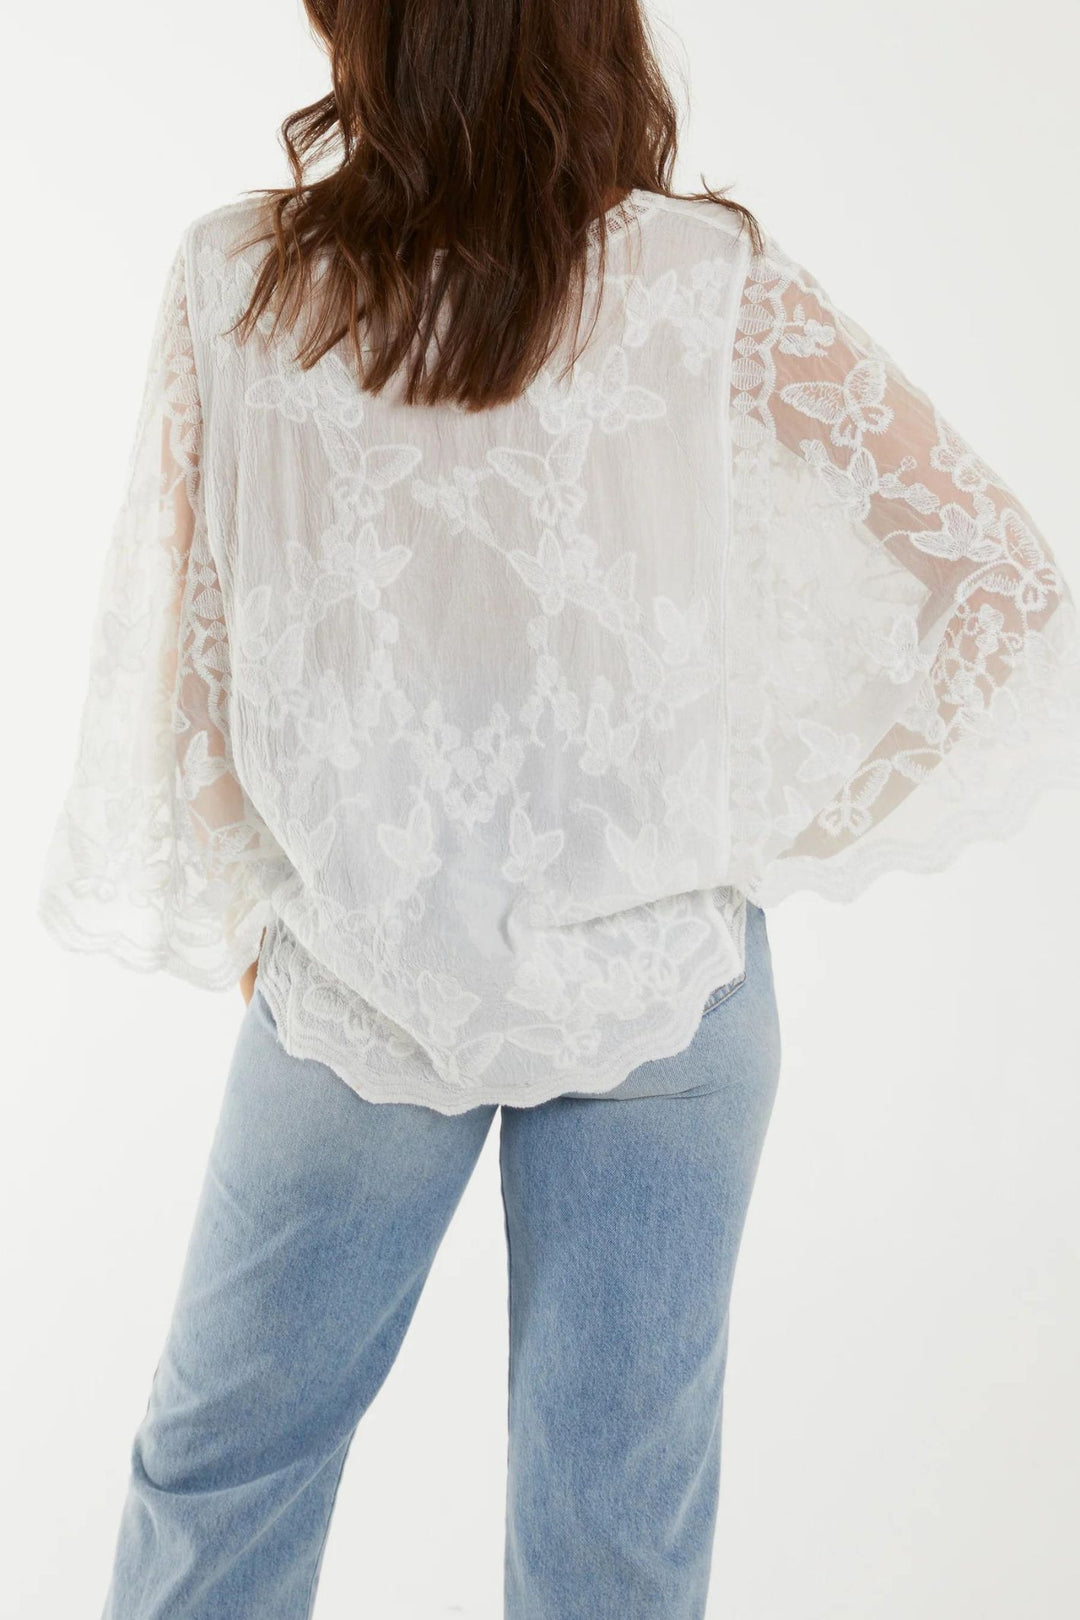 Off White Butterfly Embroidered Lace Scallop Sleeve Top